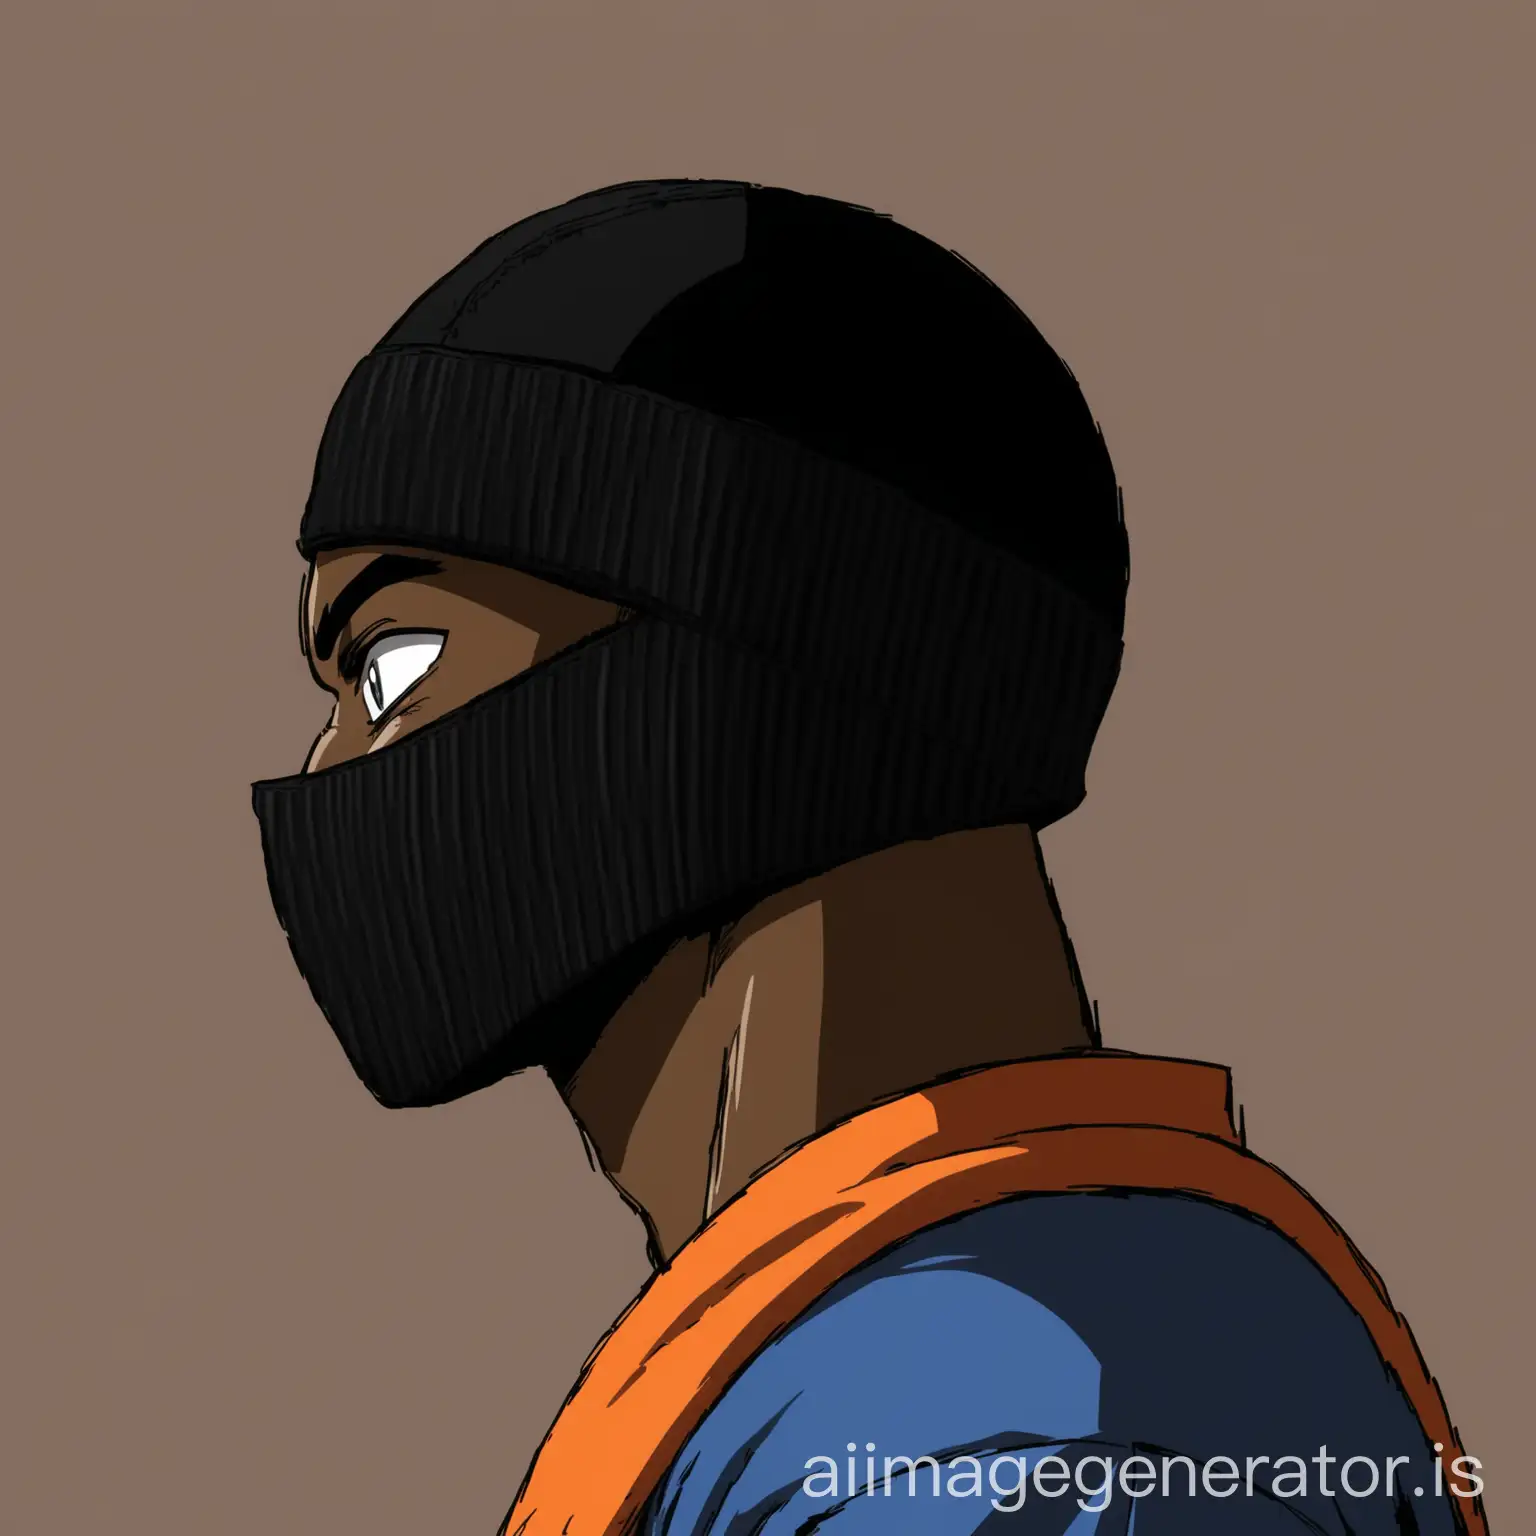 A side profile picture of a black guy with a black ski mask and a cap worn the other side in dragon ball, in dragon ball style